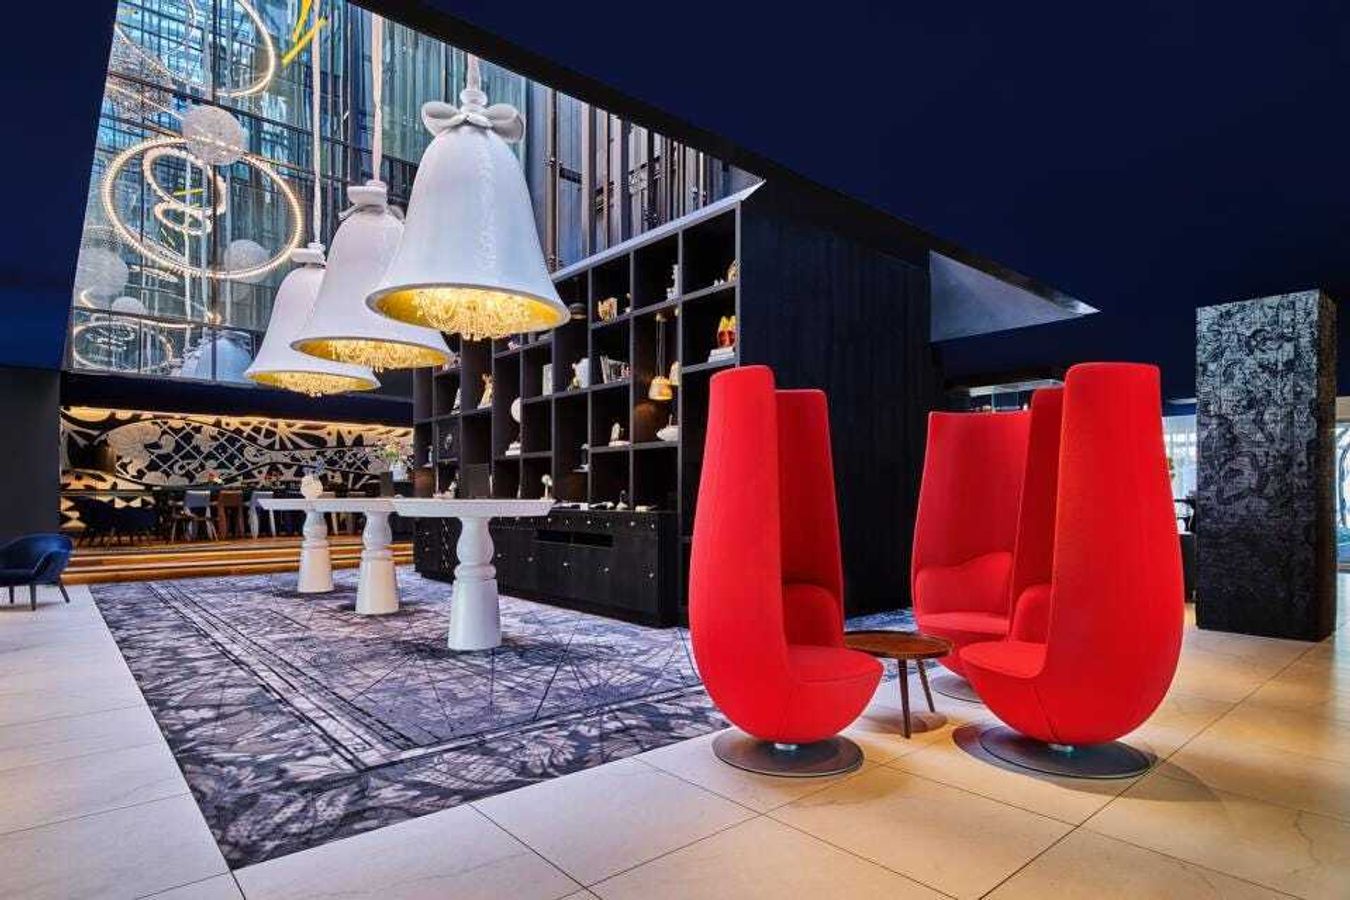 Andaz Amsterdam Prinsengracht: Get Inspired By This Hotel’s Maximalist Design